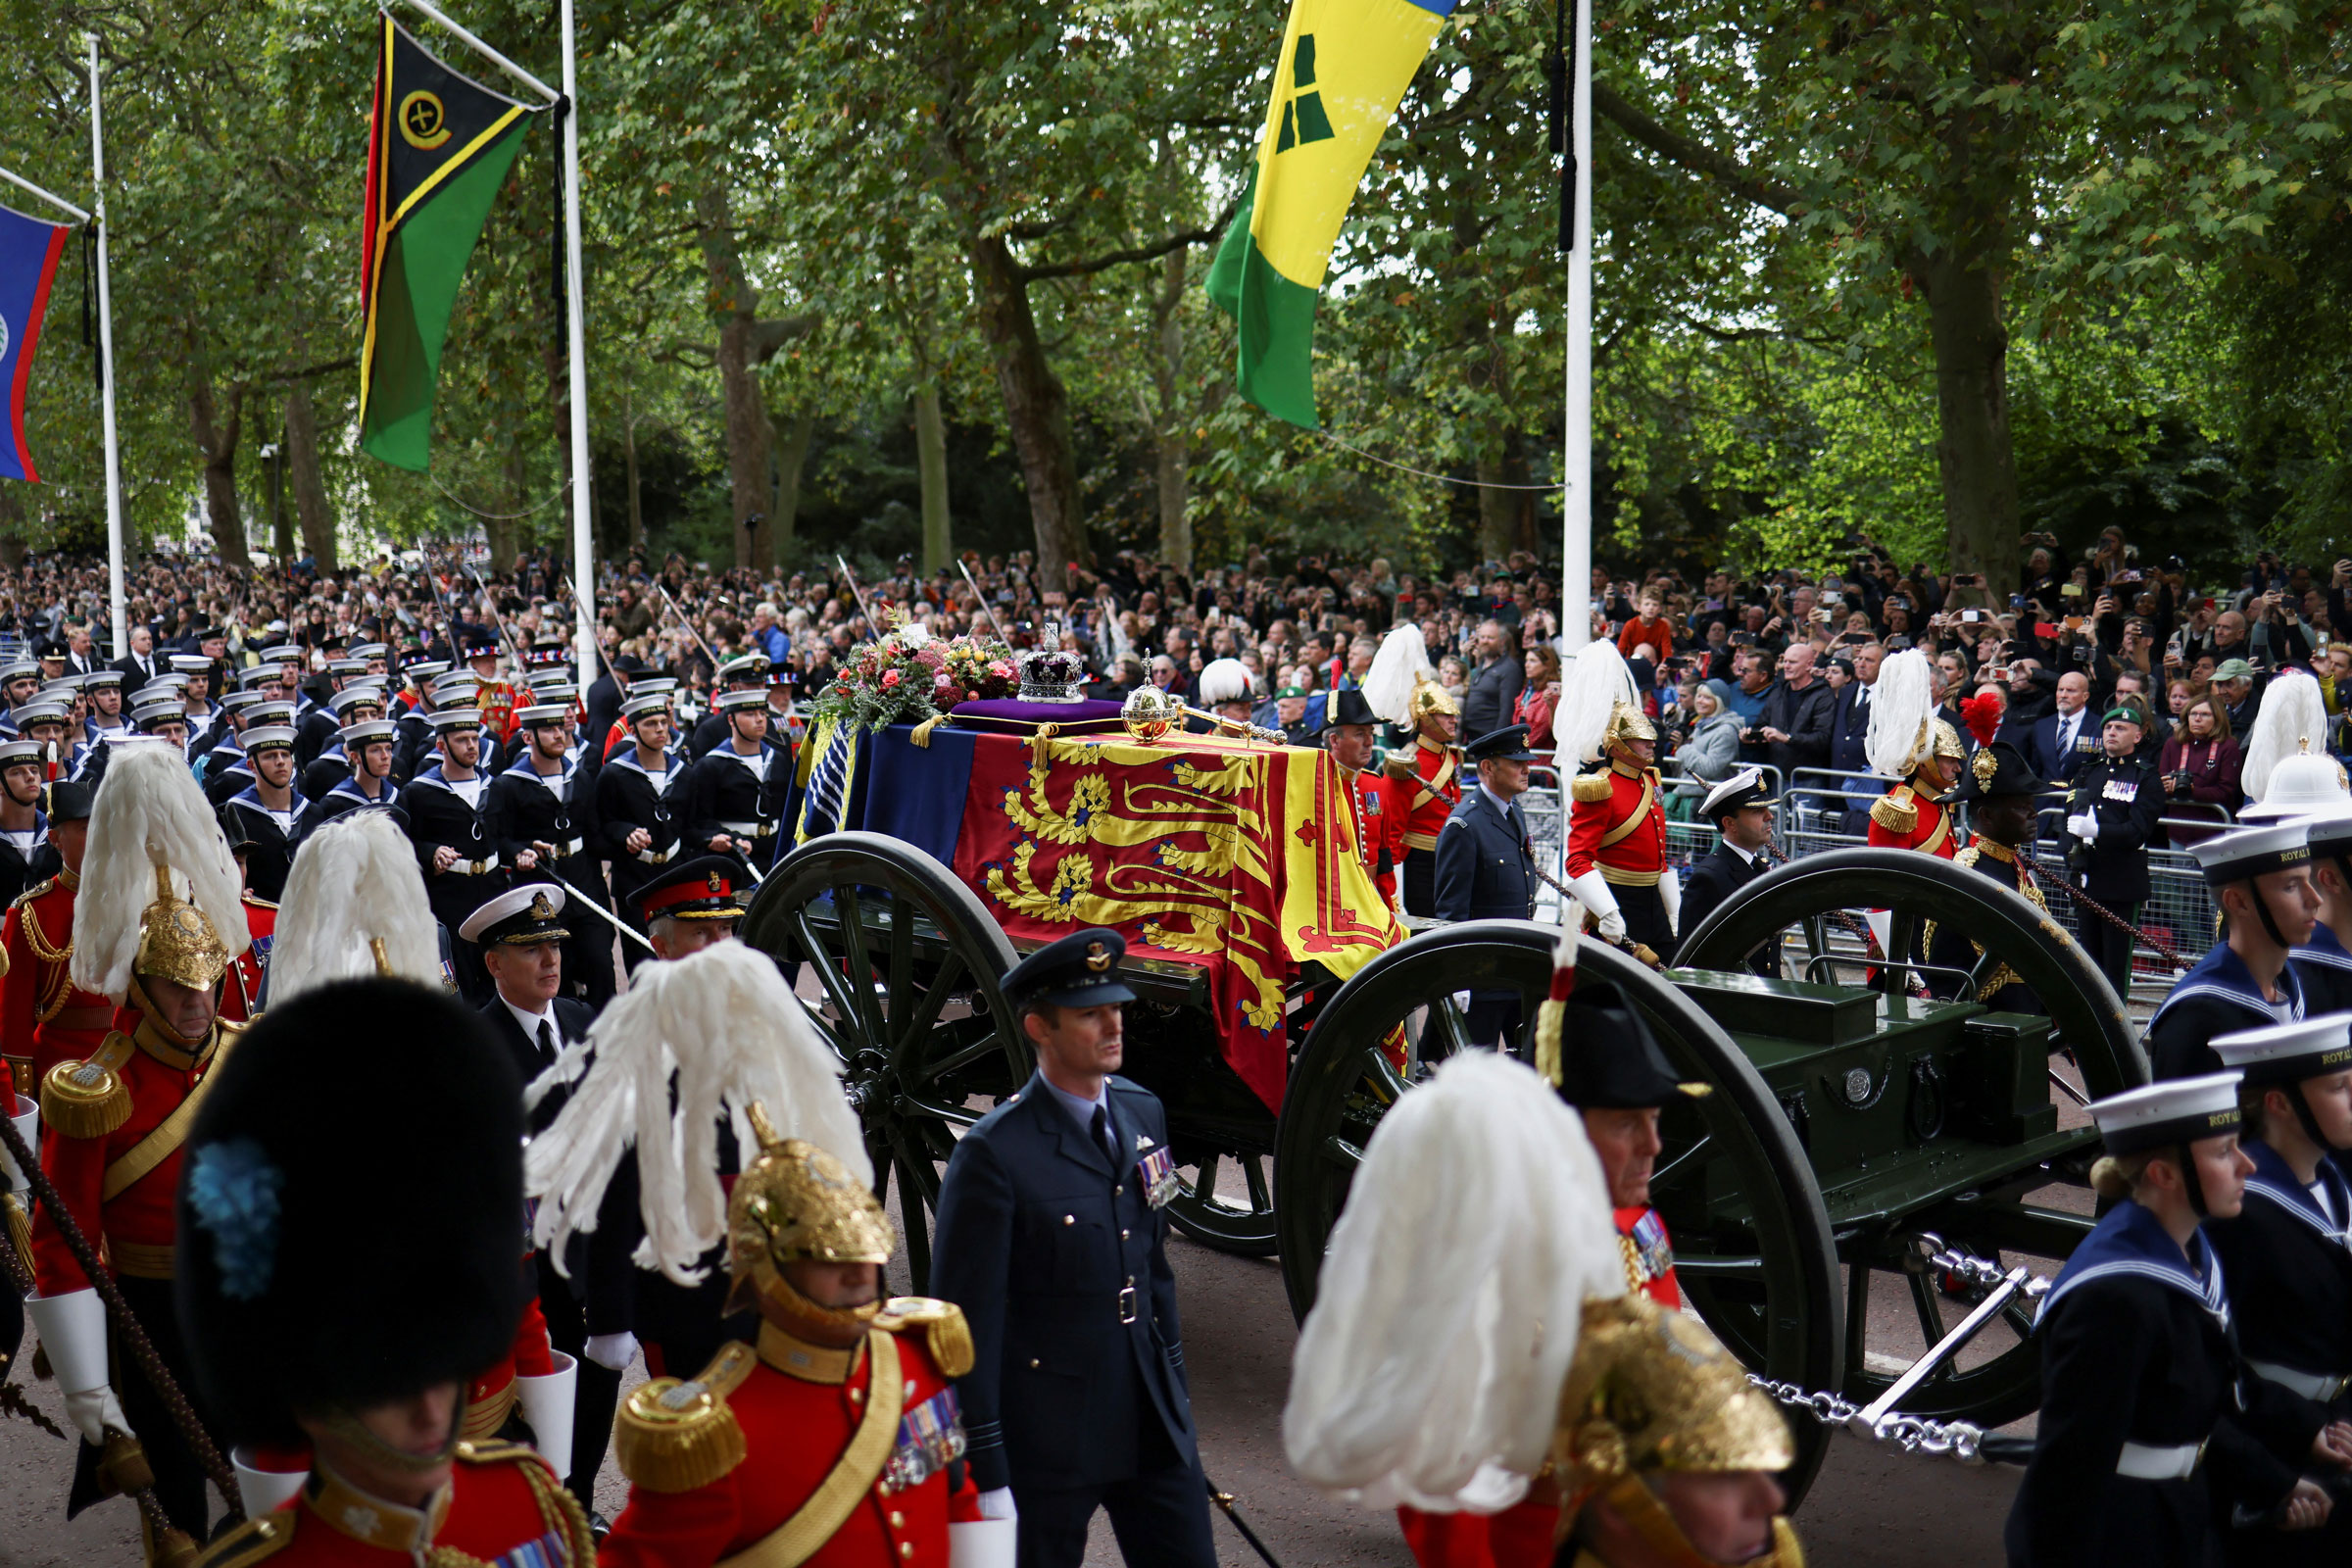 The procession carries the coffin on the day of the state funeral and burial of Britain's Queen Elizabeth II. (Tom Nicholson—Reuters)